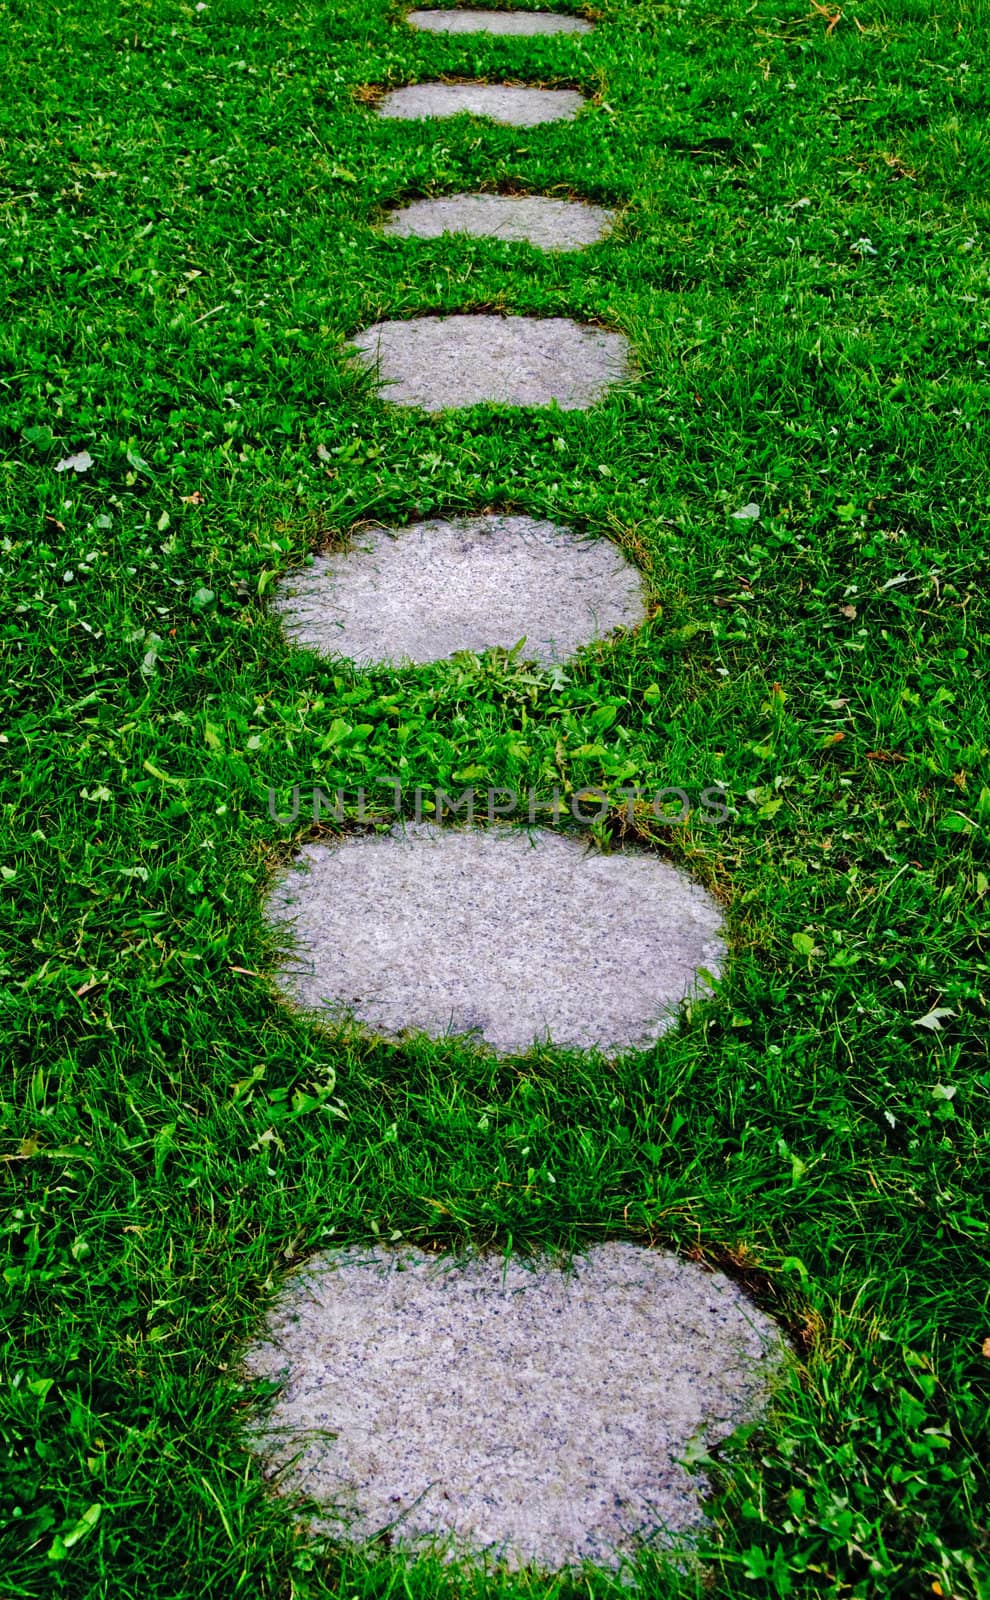 Steps stones in grass